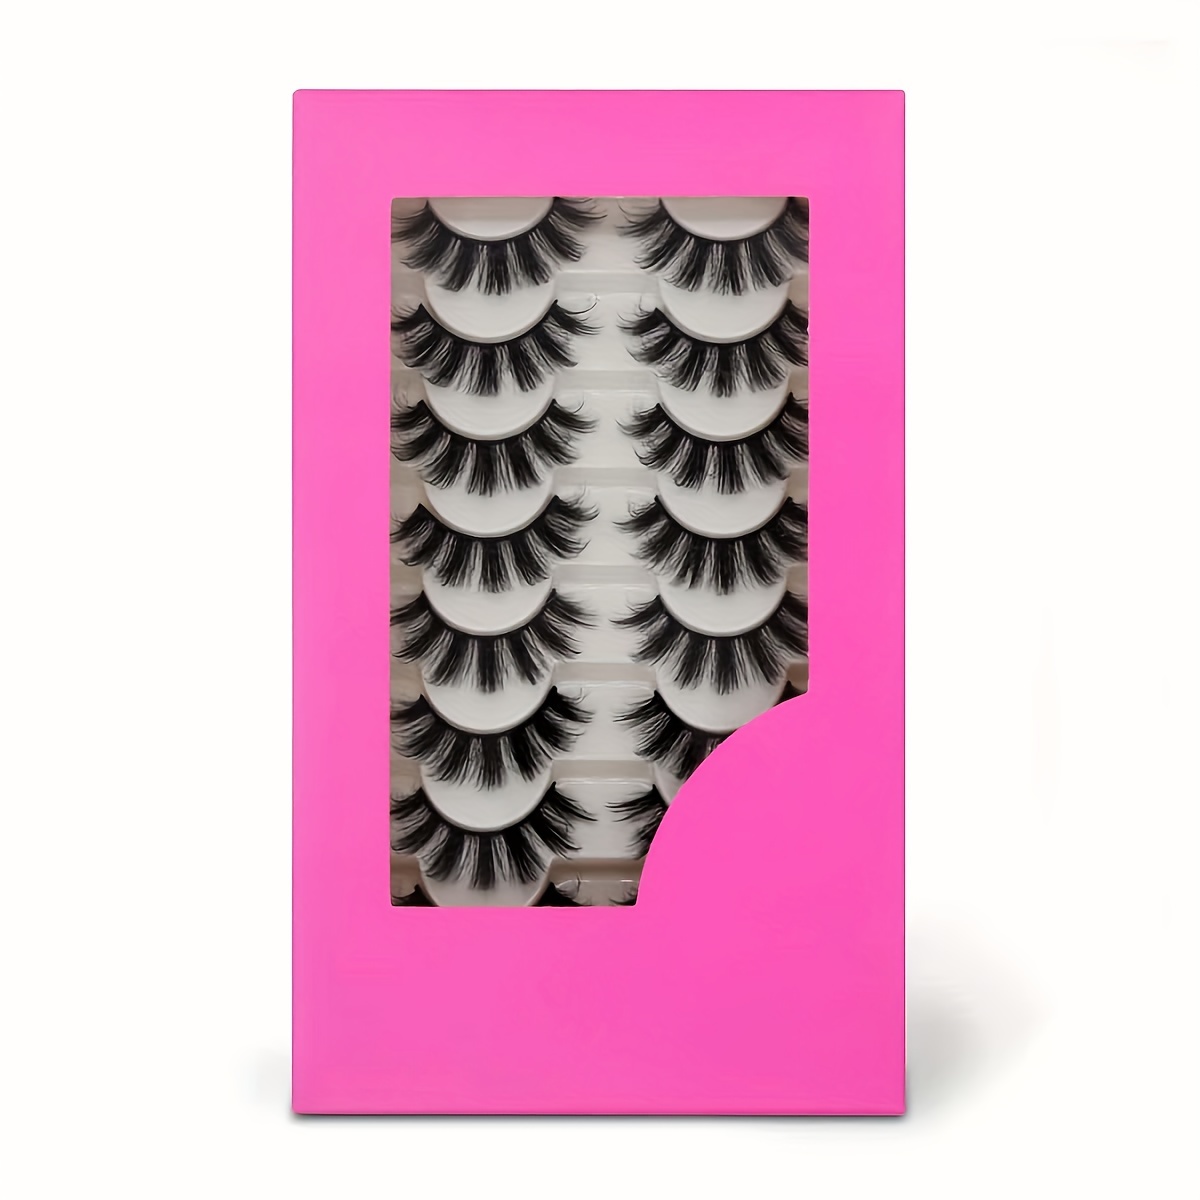 

8pair Of 21mm 3d False Eyelashes Cross Fluffy Natural Look Pack Volume Fluffy Natural Faux Mink Lashes (drak Pink) 8pair Soft False Eyelashes